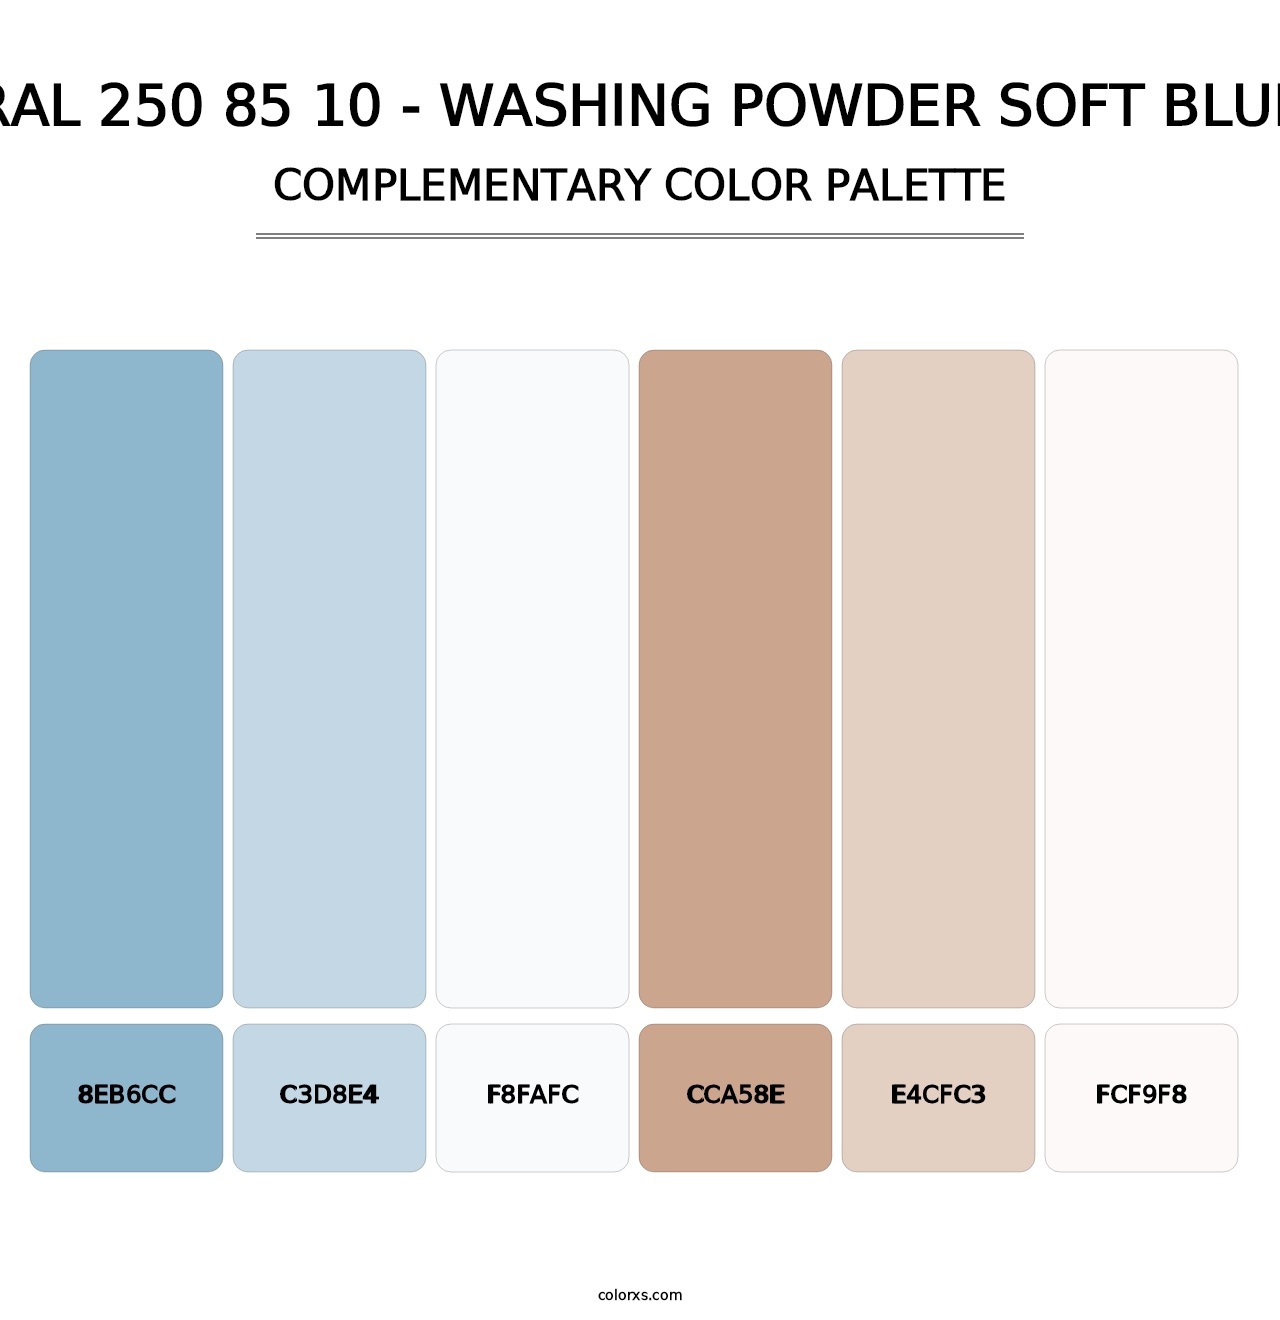 RAL 250 85 10 - Washing Powder Soft Blue - Complementary Color Palette